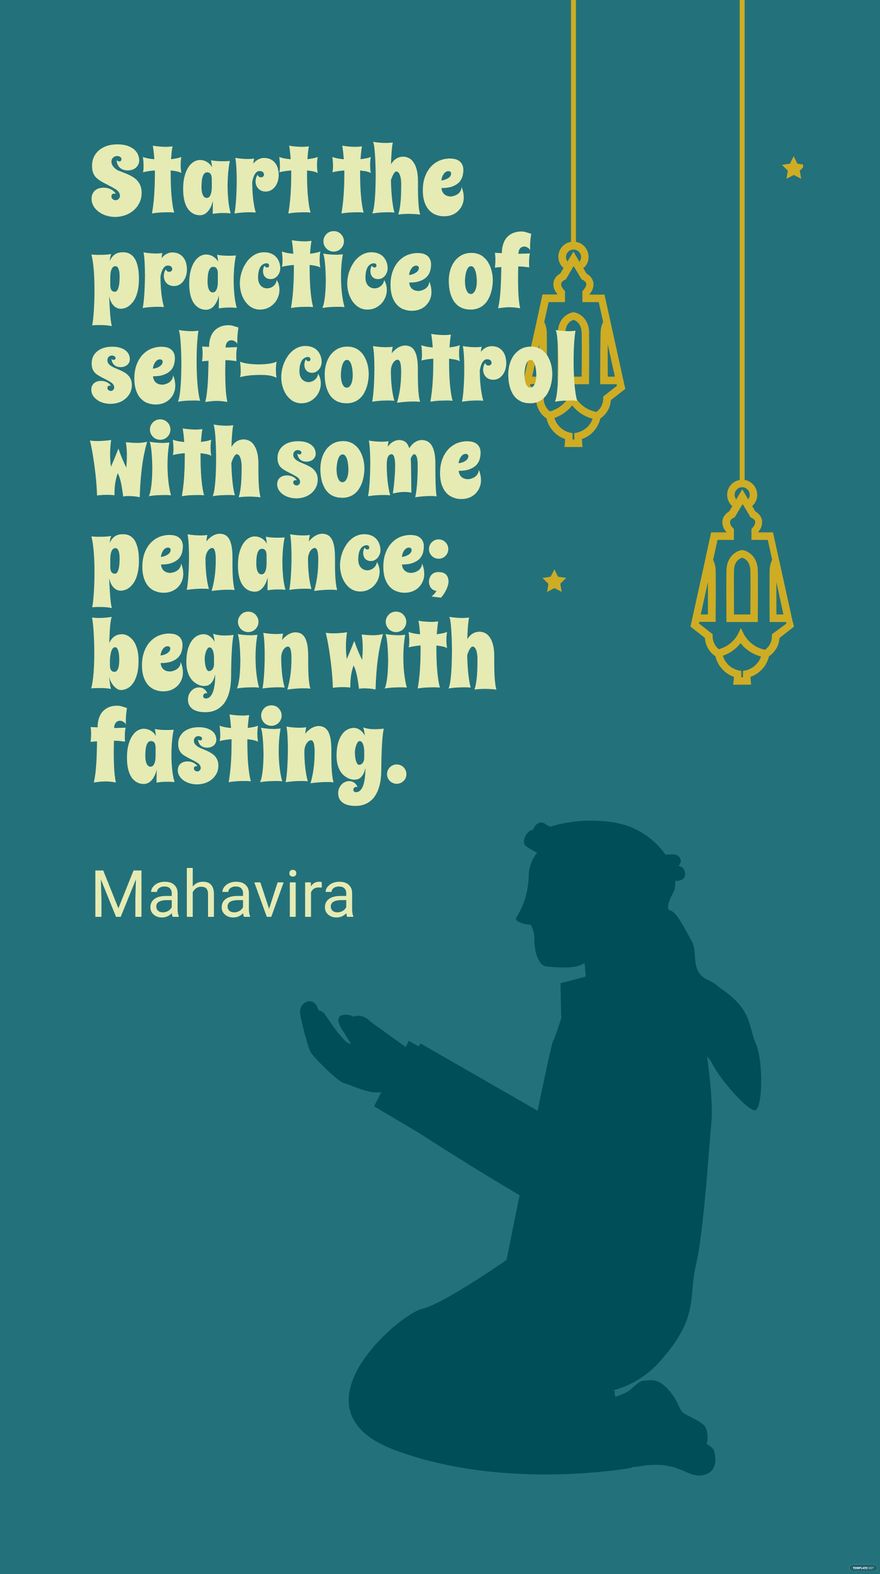 Mahavira - Start the practice of self-control with some penance; begin with fasting.